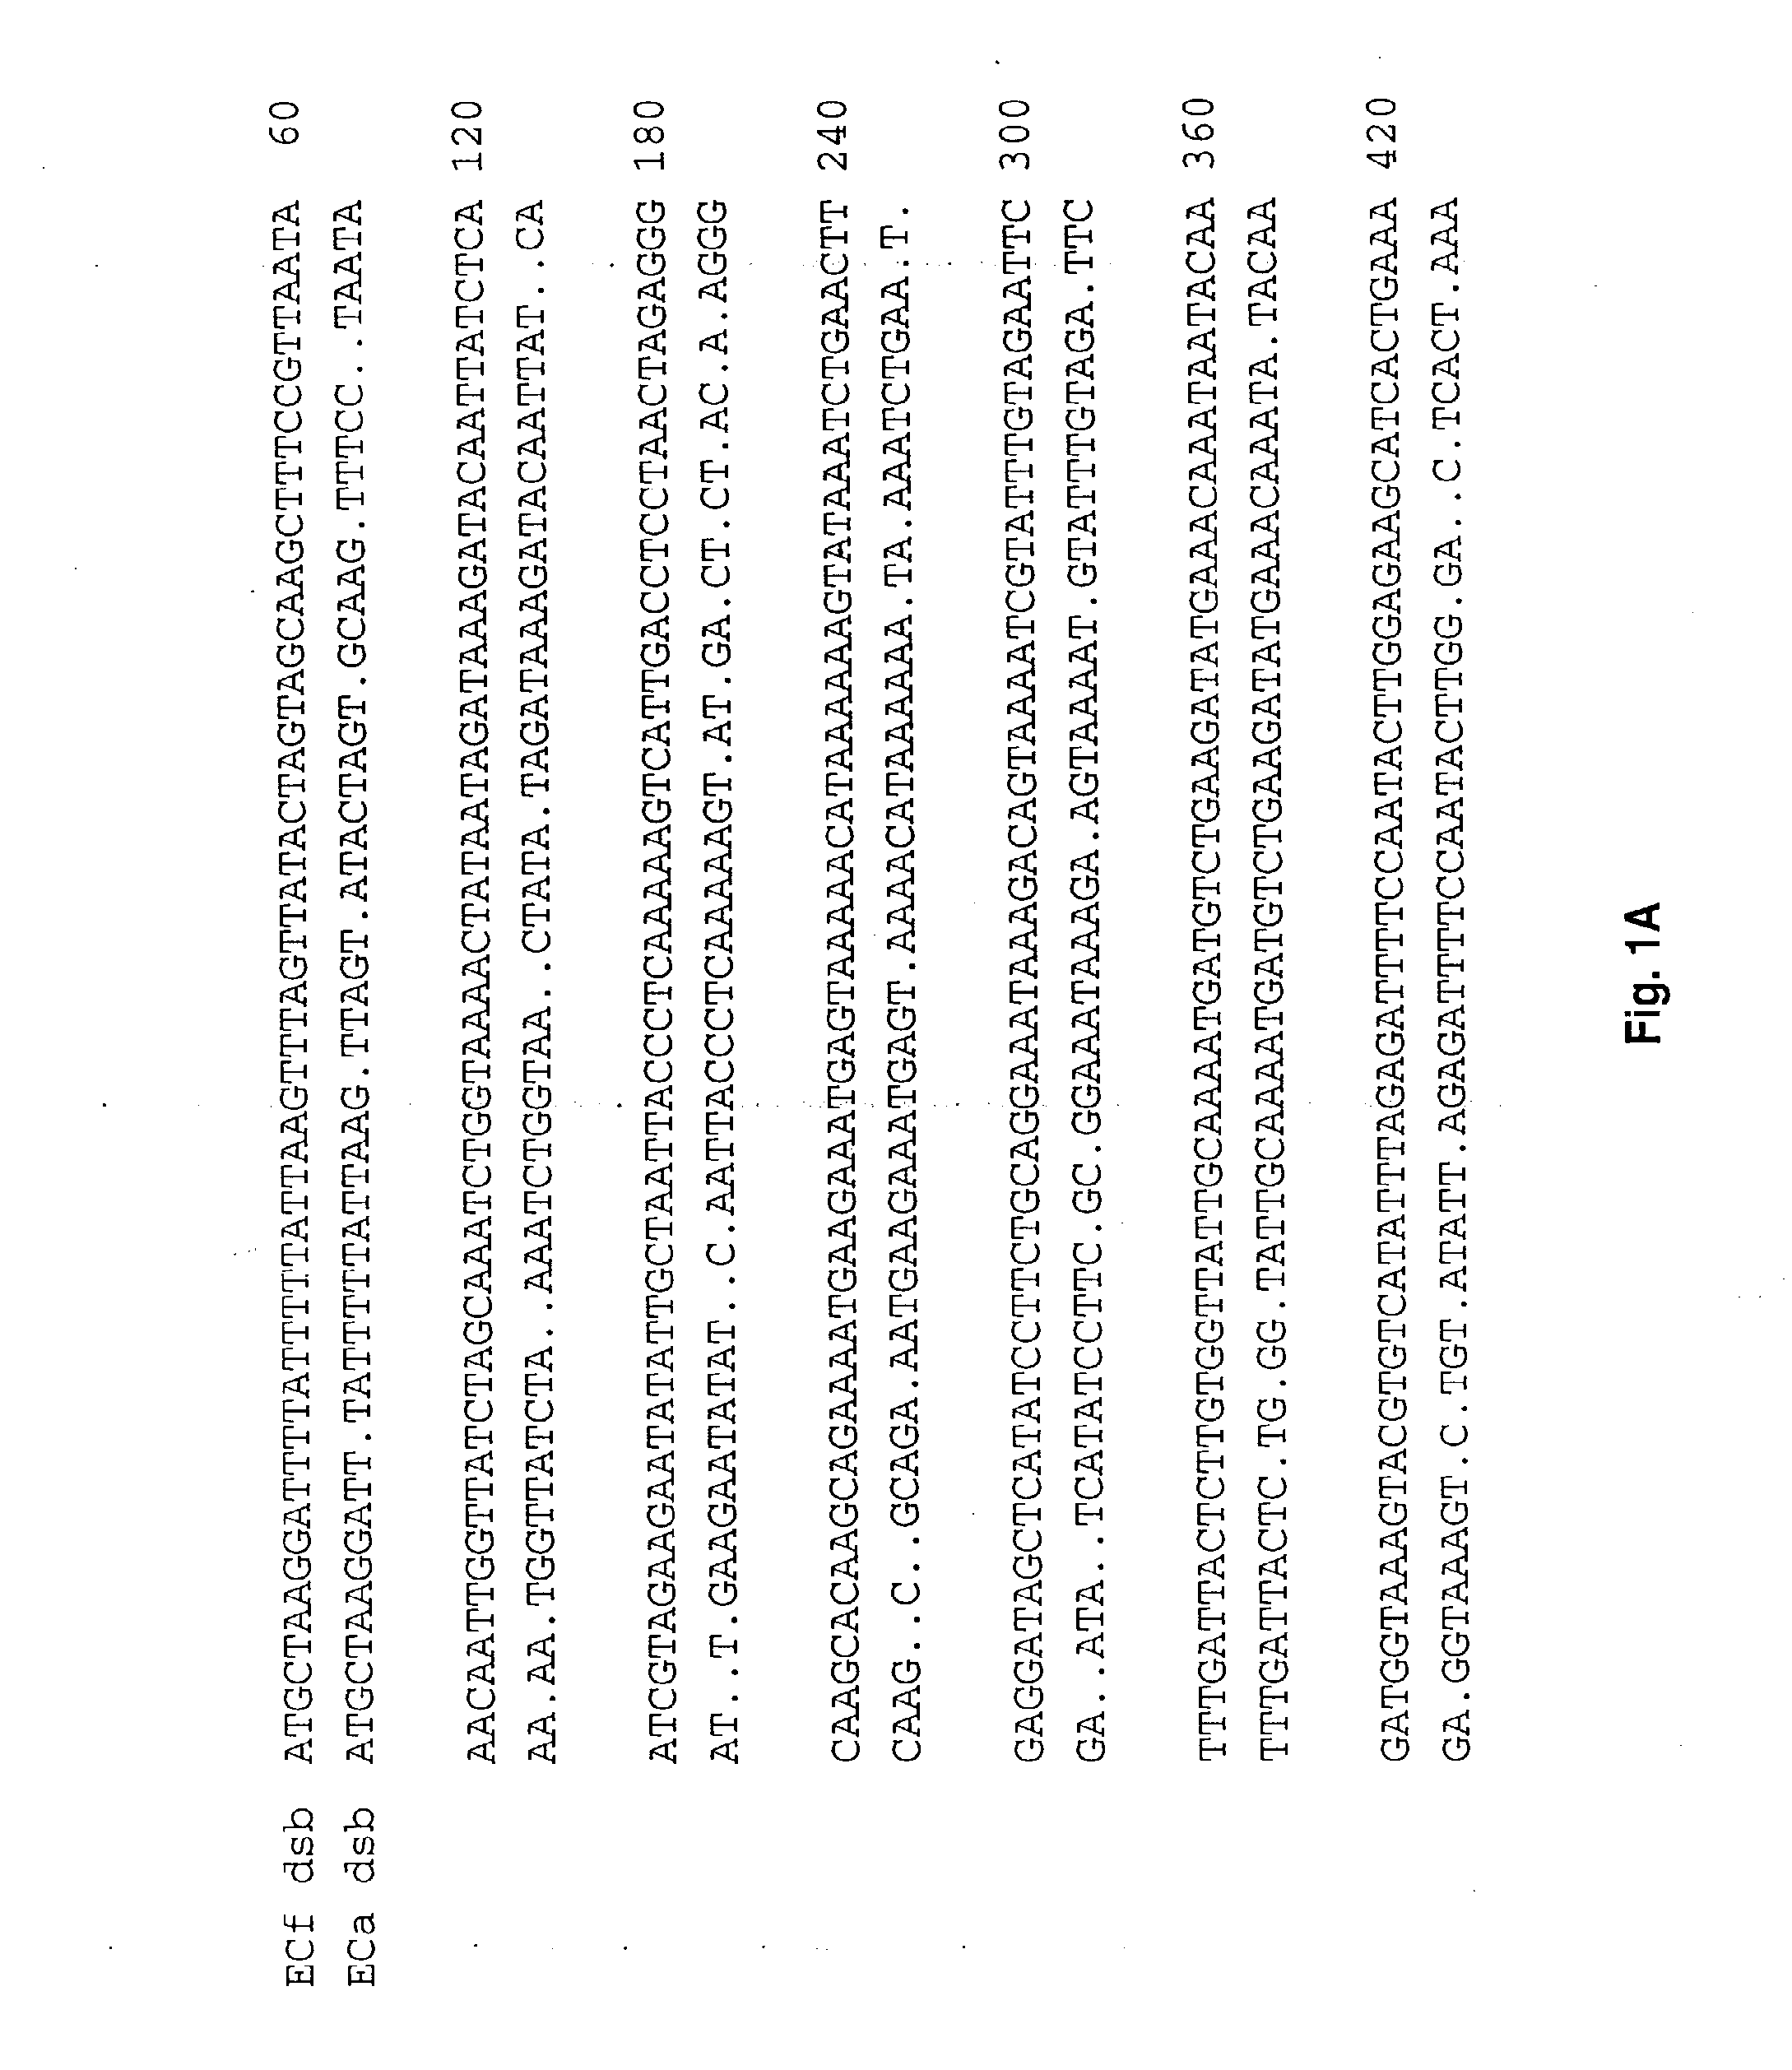 Ehrlichia disulfide bond formation proteins and uses thereof